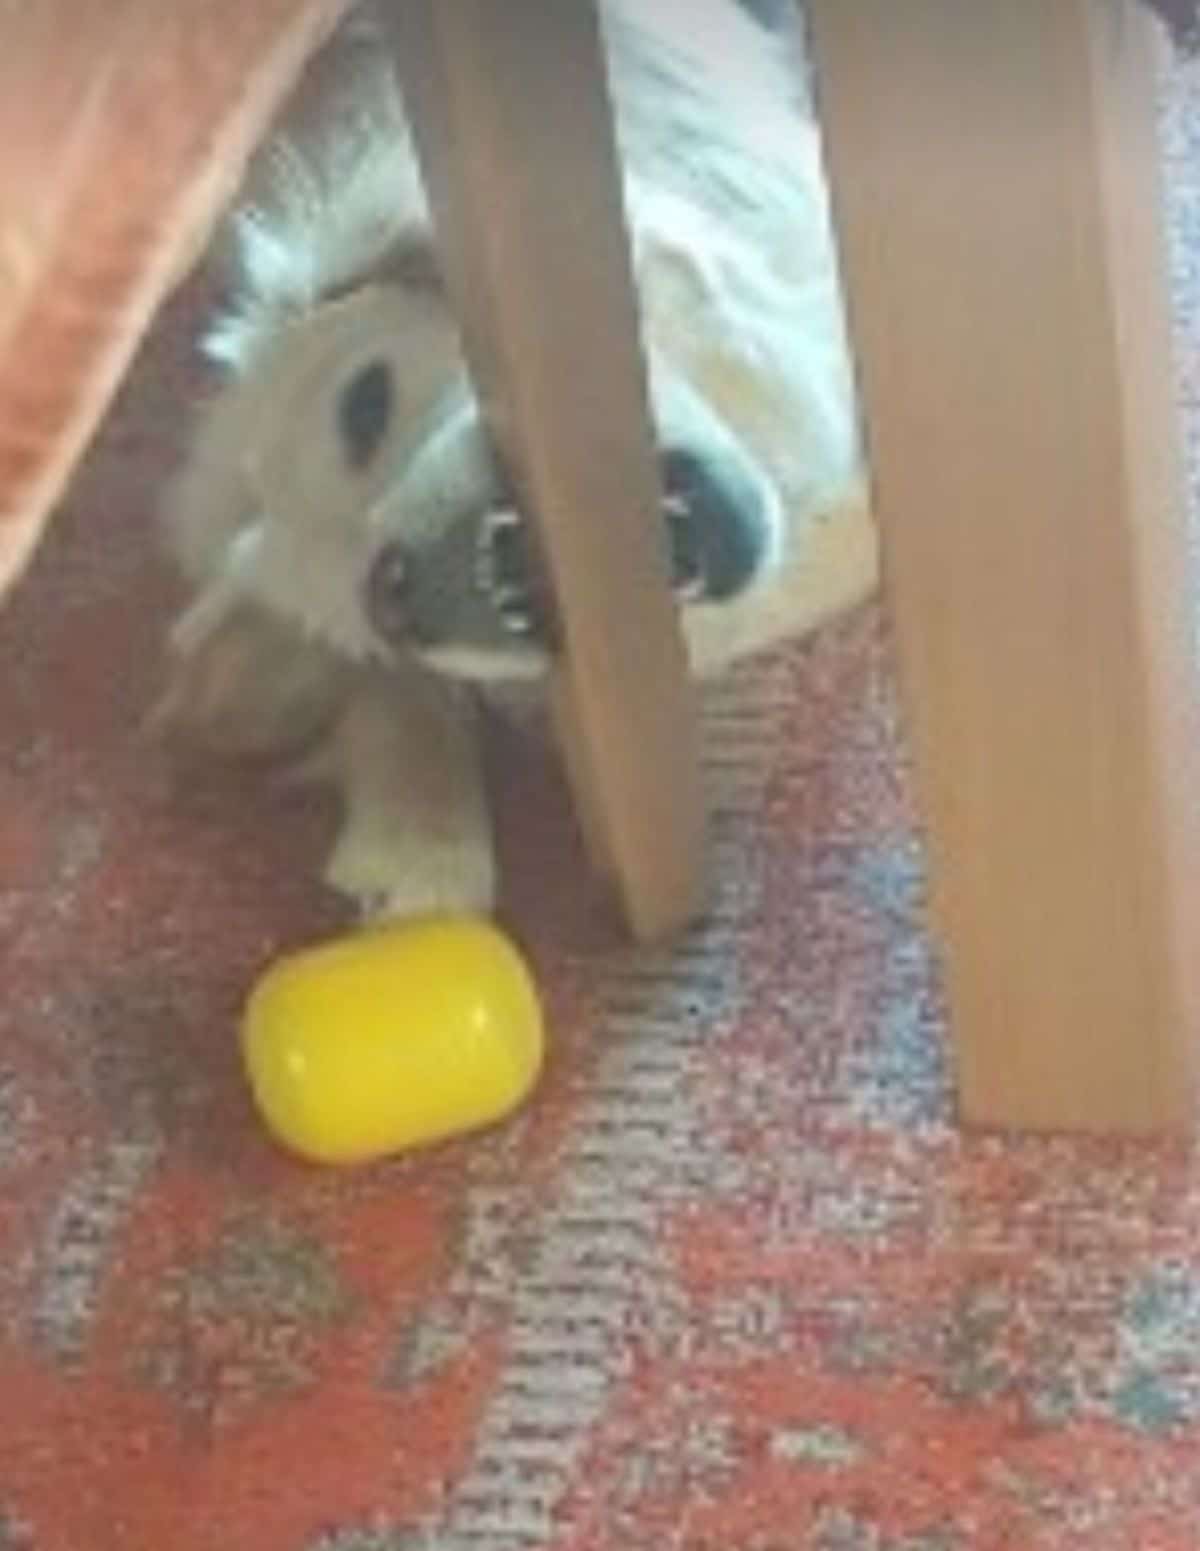 golden retriever laying on the floor and chewing on a brown wooden table leg